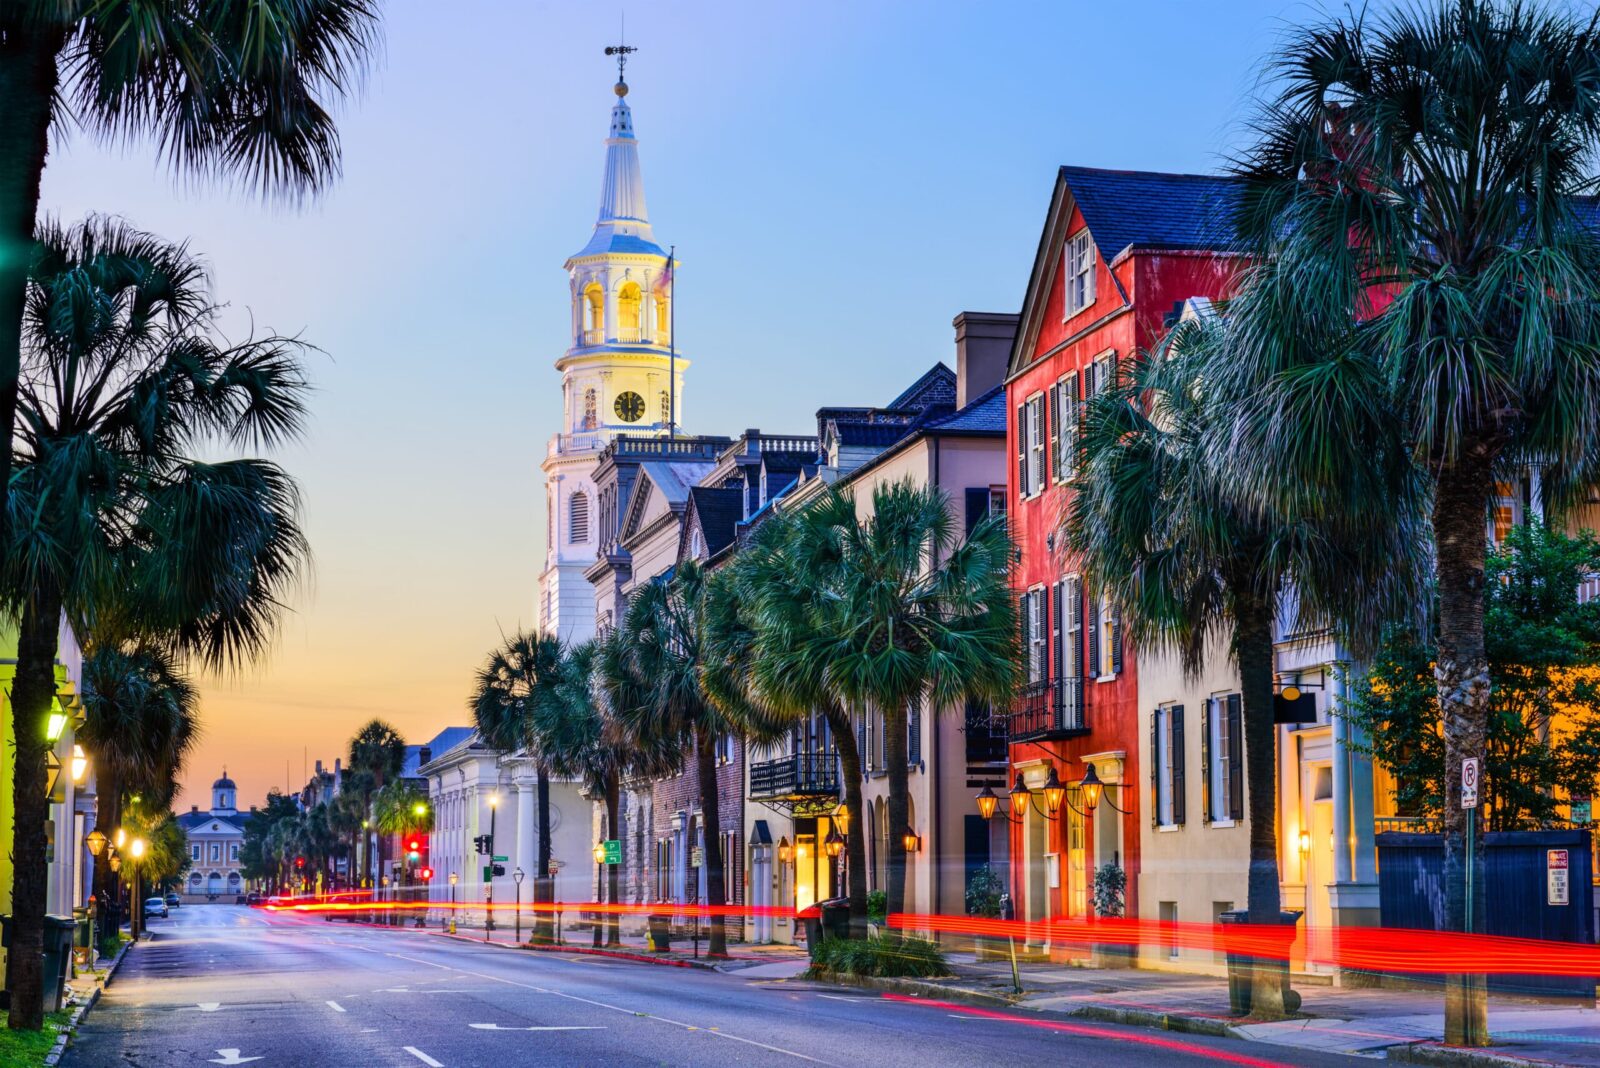 <p><span>Step back in time and explore the charming cobblestone streets and antebellum architecture of Charleston, reminiscent of historic European cities like Paris and Edinburgh.</span></p>